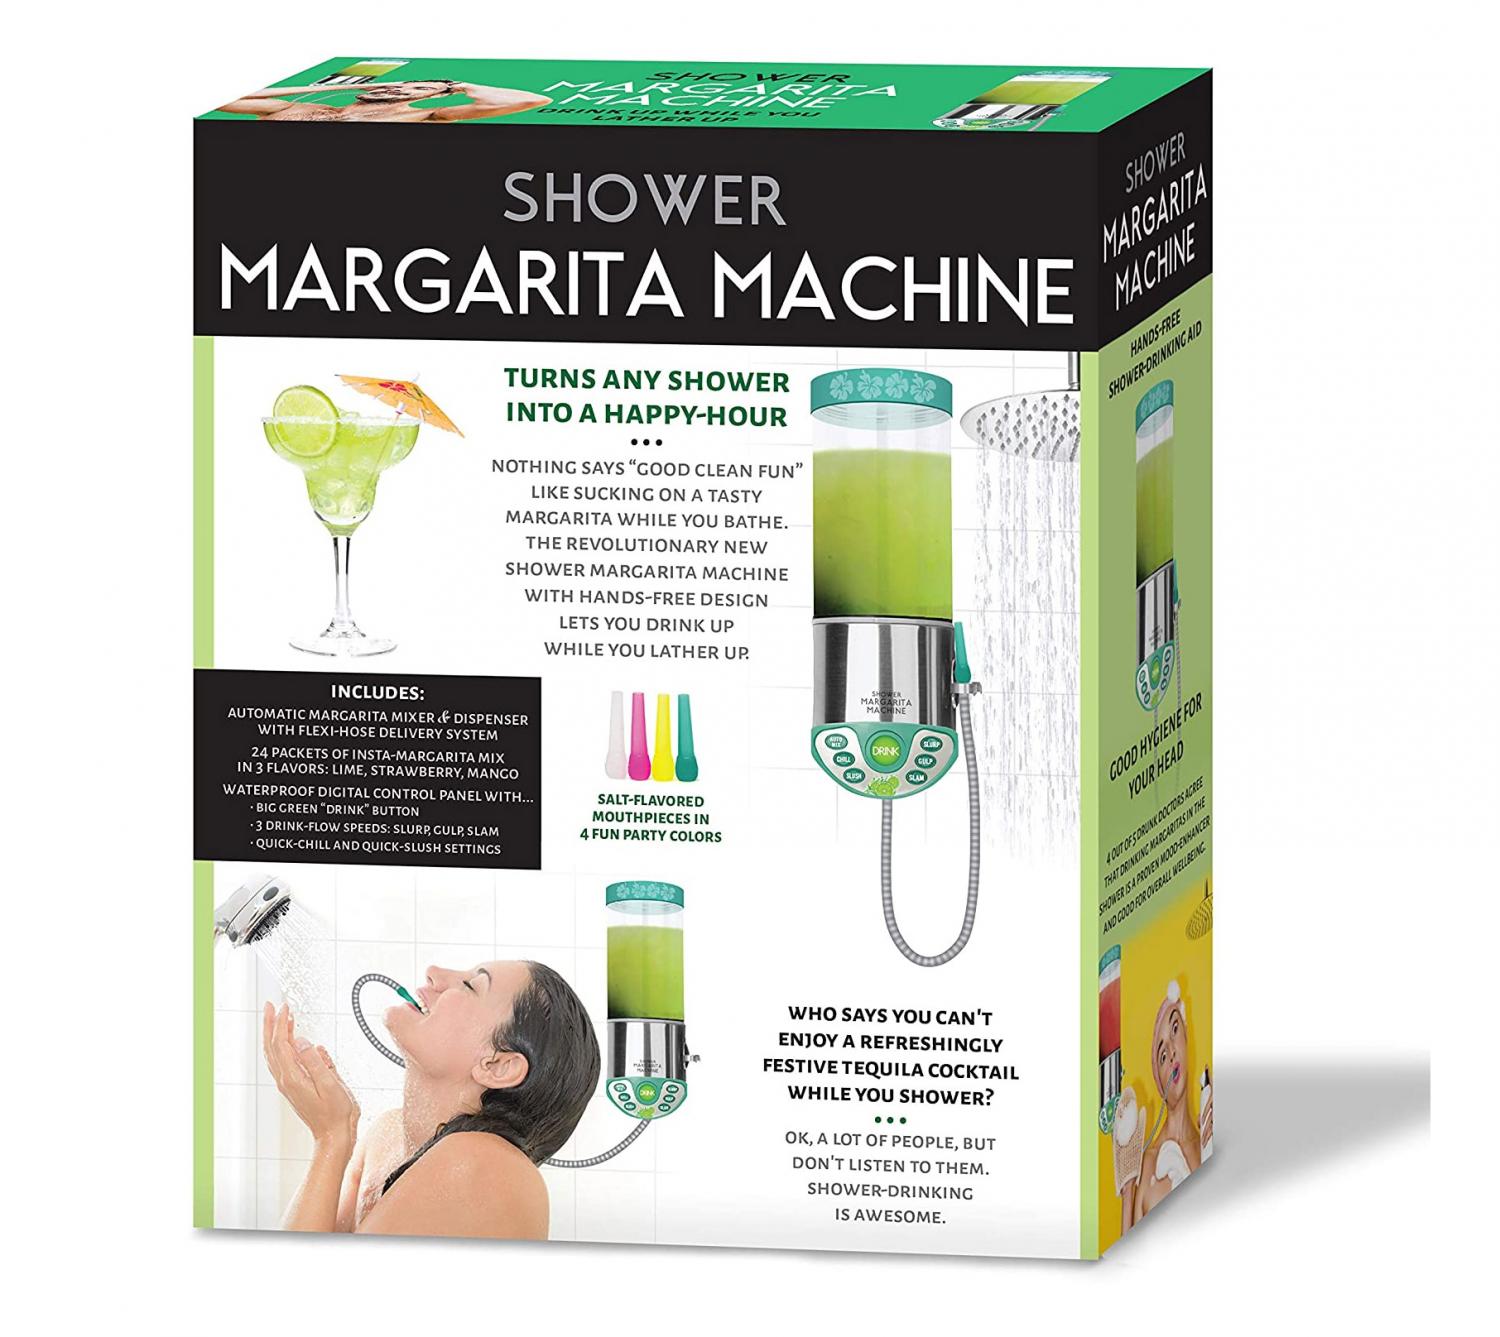 Shower Margarita Machine Gets You Boozed Up In The Shower Hands-Free